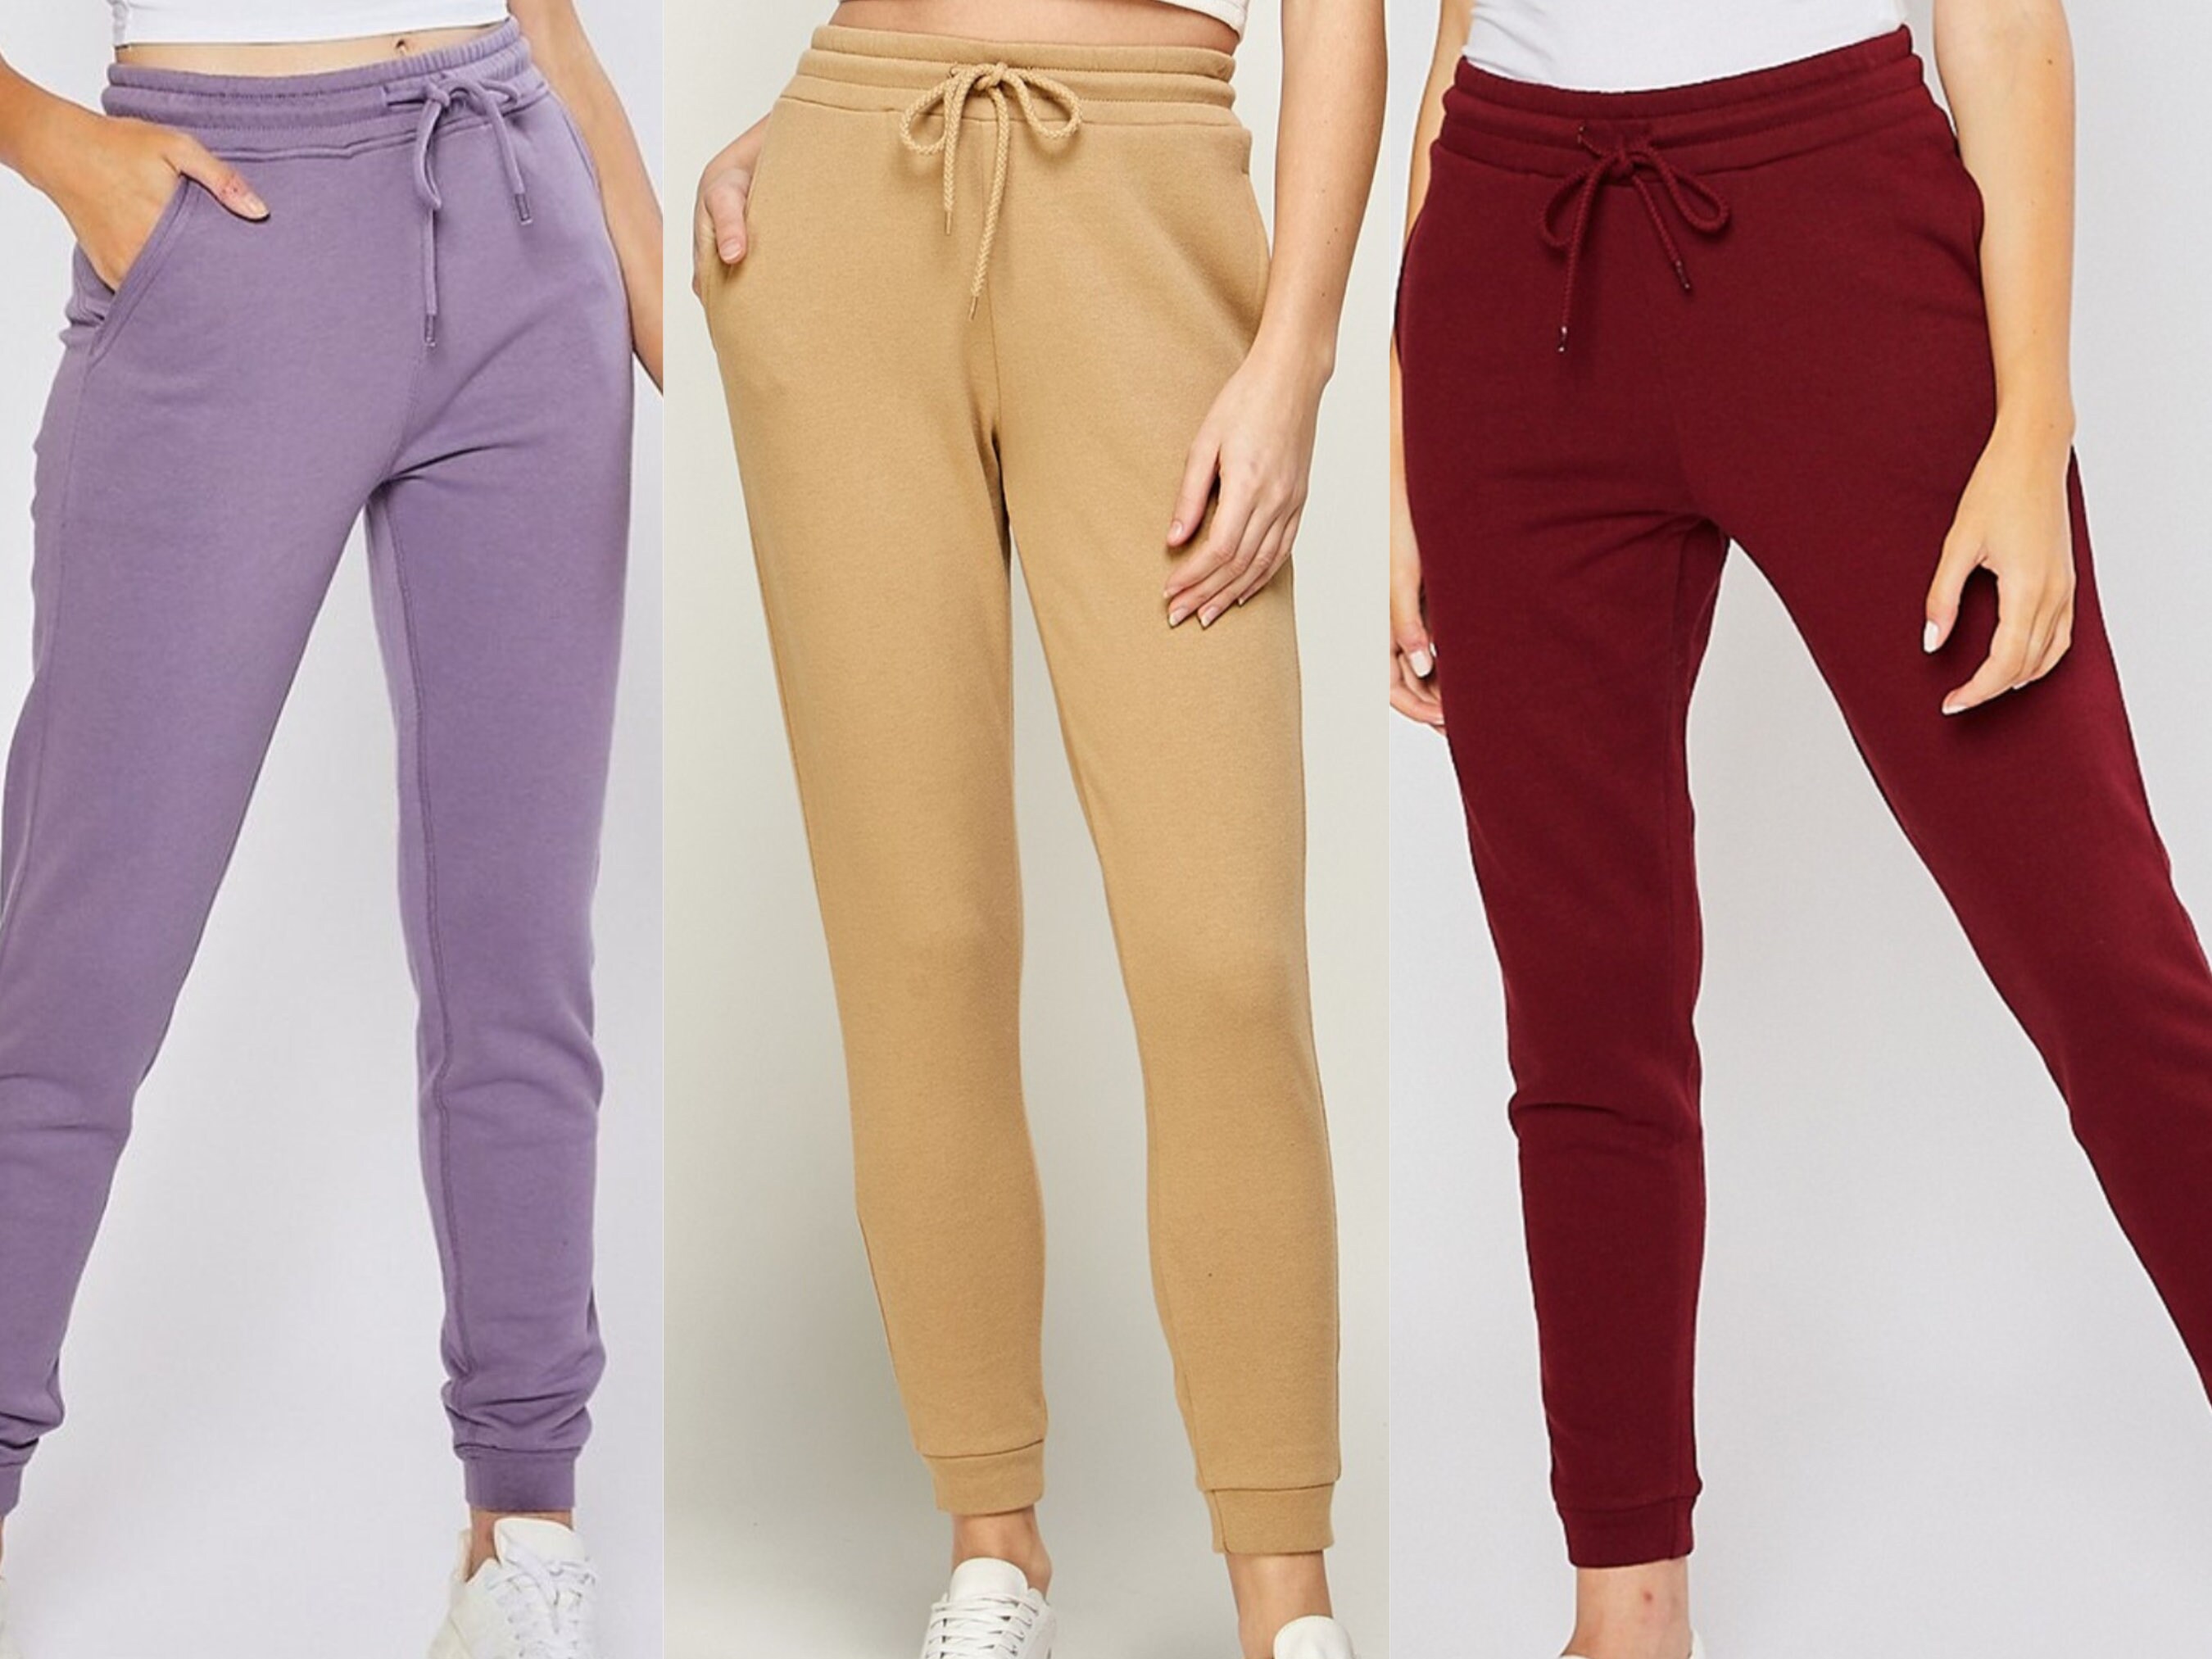 Women's Tapered Jogger Sweatpants High Waisted Athletic -  Canada